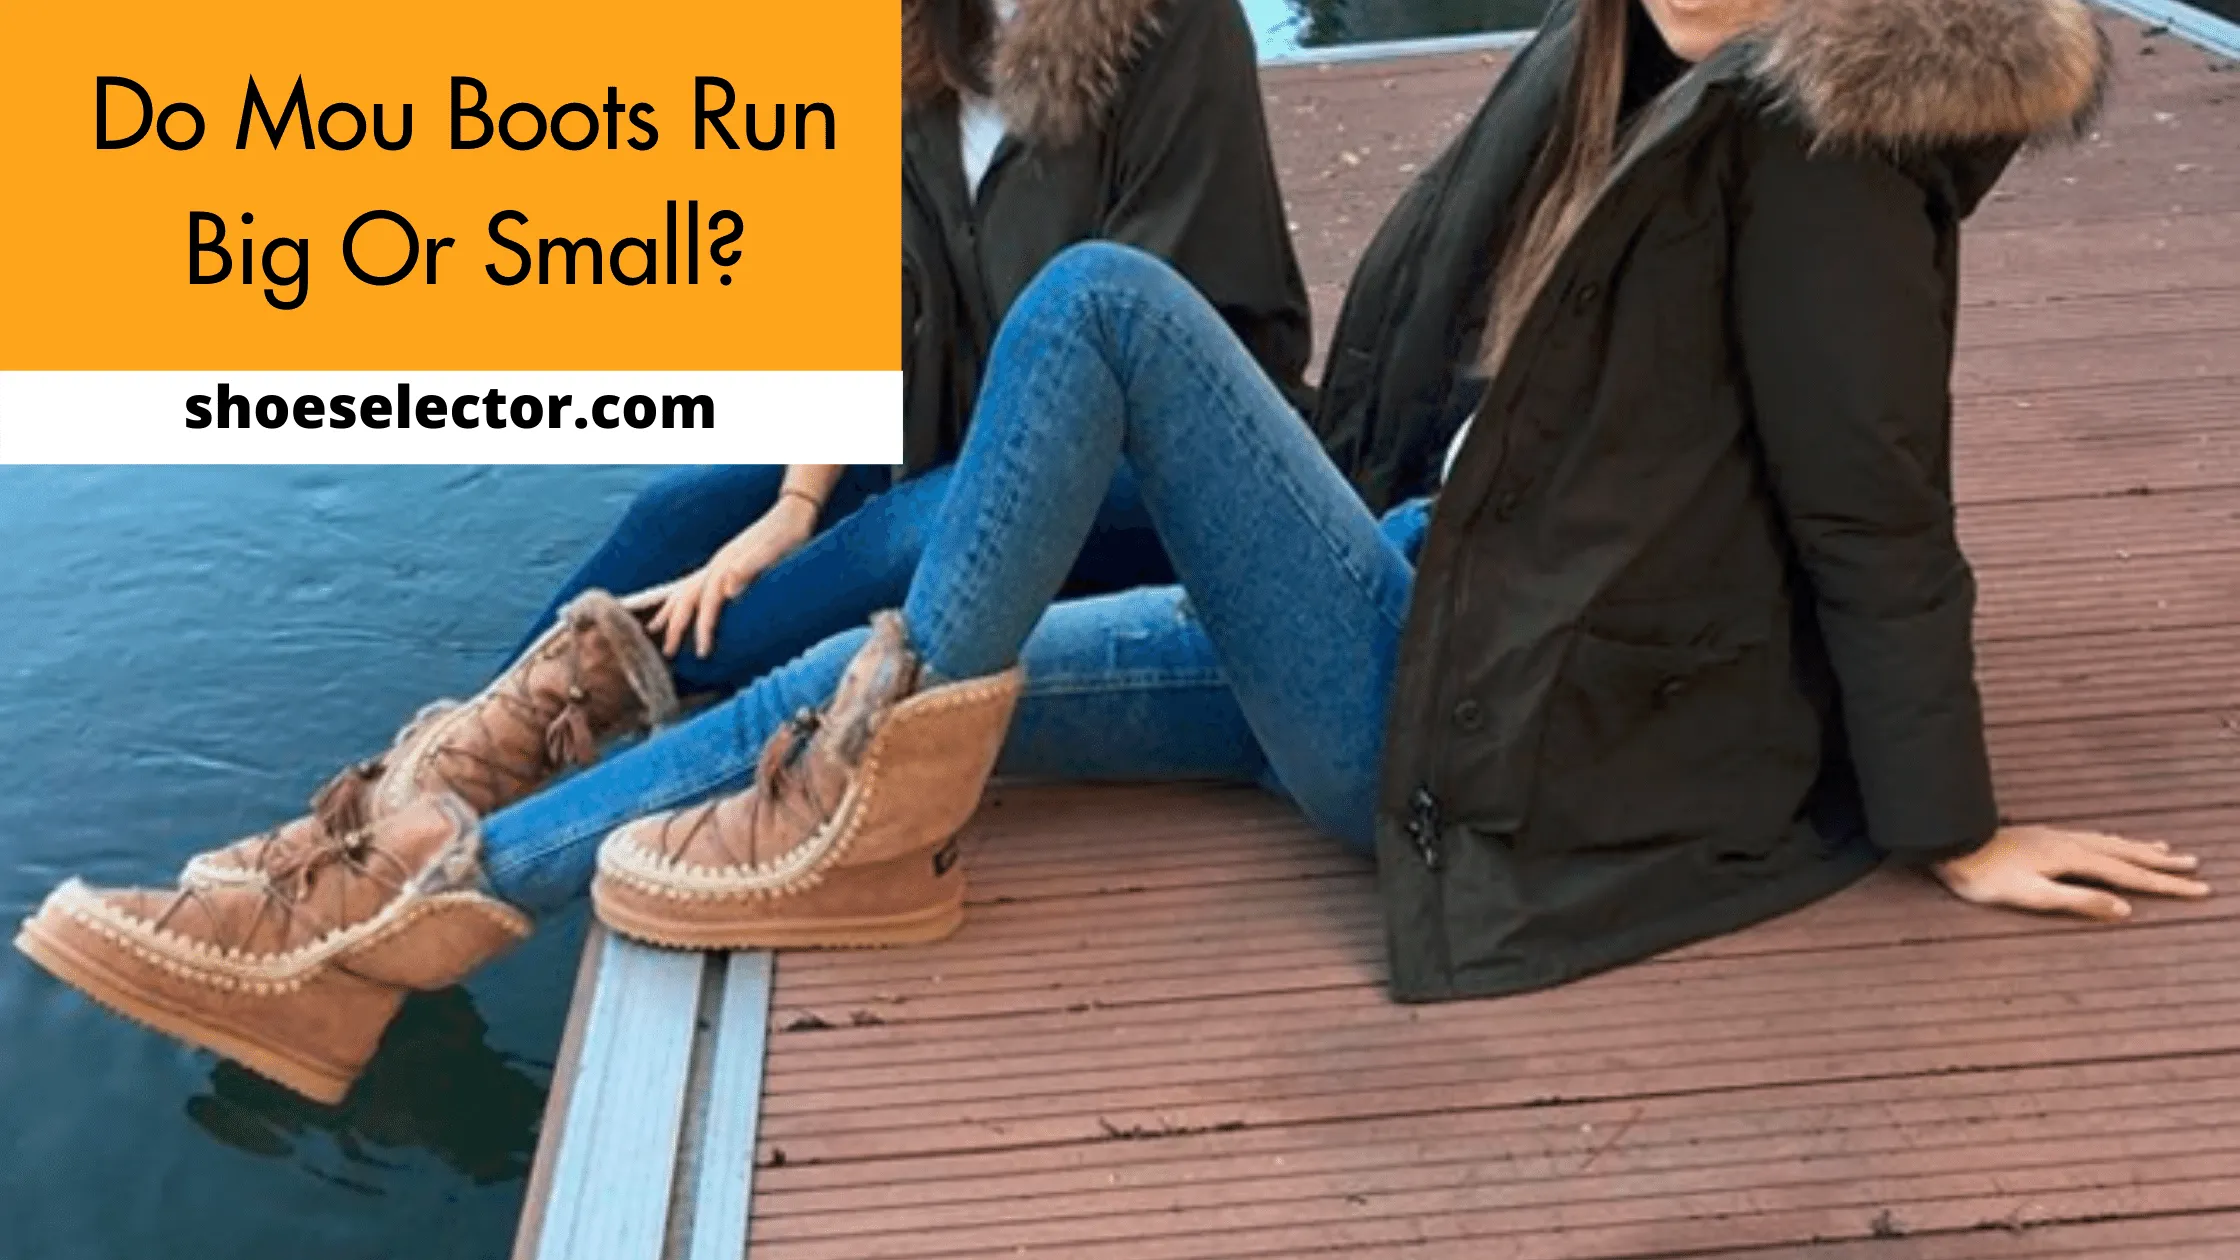 Do Mou Boots Run Big or Small? Easy Guide